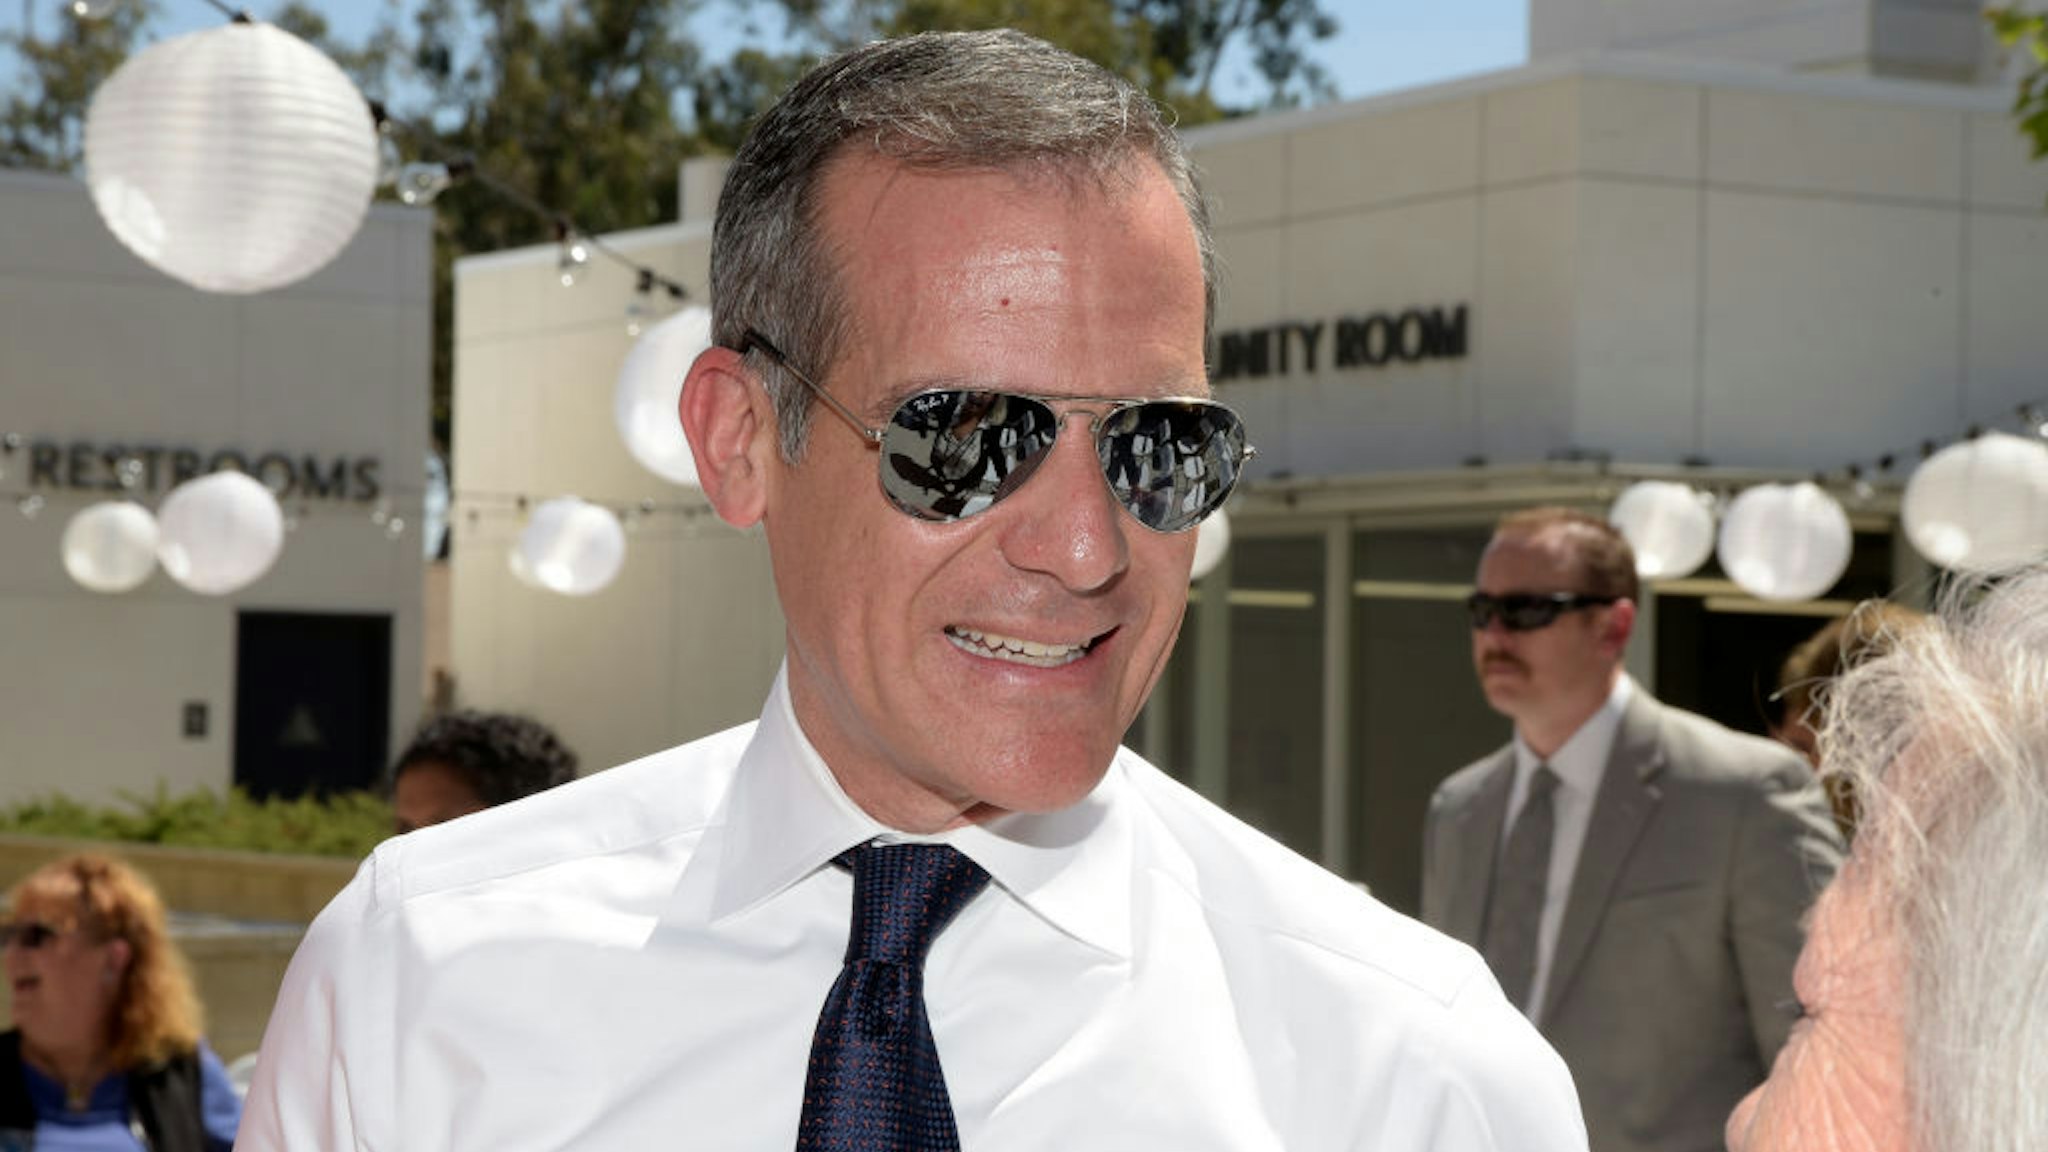 Los Angeles Mayor Eric Garcetti attends the grand opening of the Irmas Family Campus at LA Family Housing at The Irmas Family Campus on May 30, 2019 in North Hollywood, California.